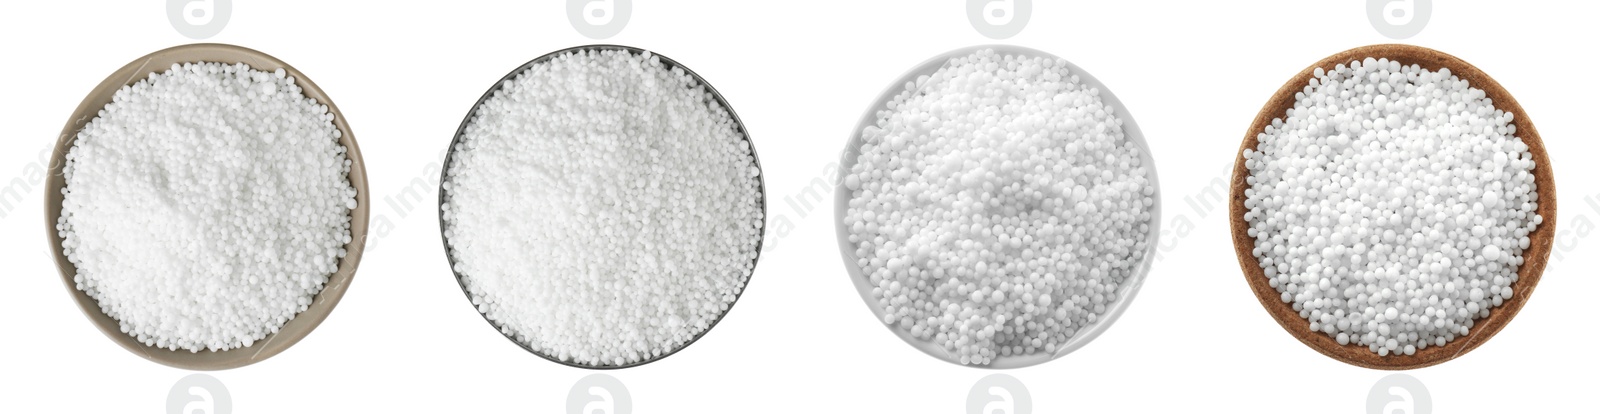 Image of Set with ammonium nitrate pellets in bowls on white background, top view. Mineral fertilizer